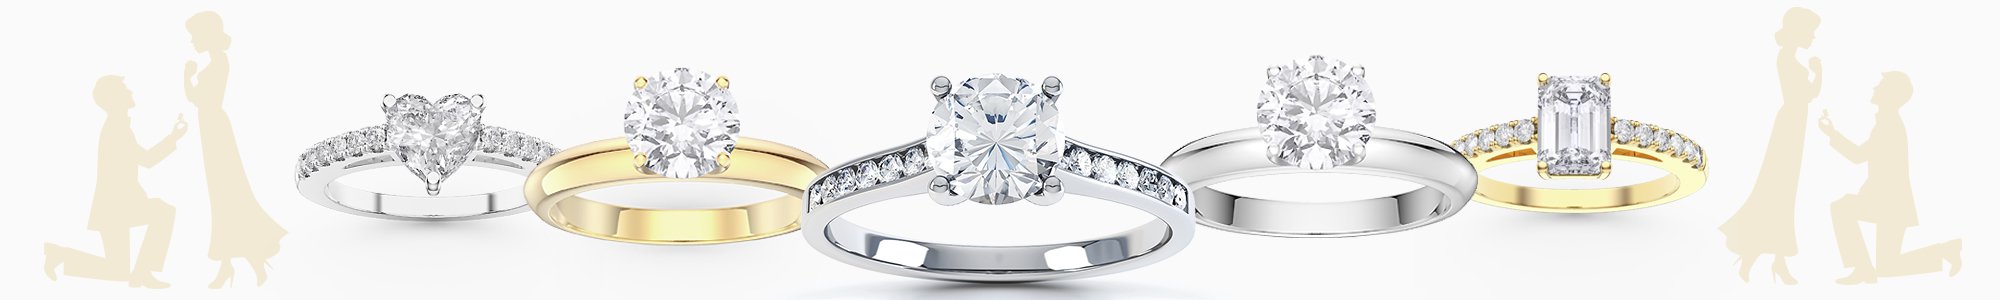 Shop Engagement Rings by Jian London. Buy direct and save from our wide selection of engagement rings at the Jian London Jewelry Store. Free US Delivery.